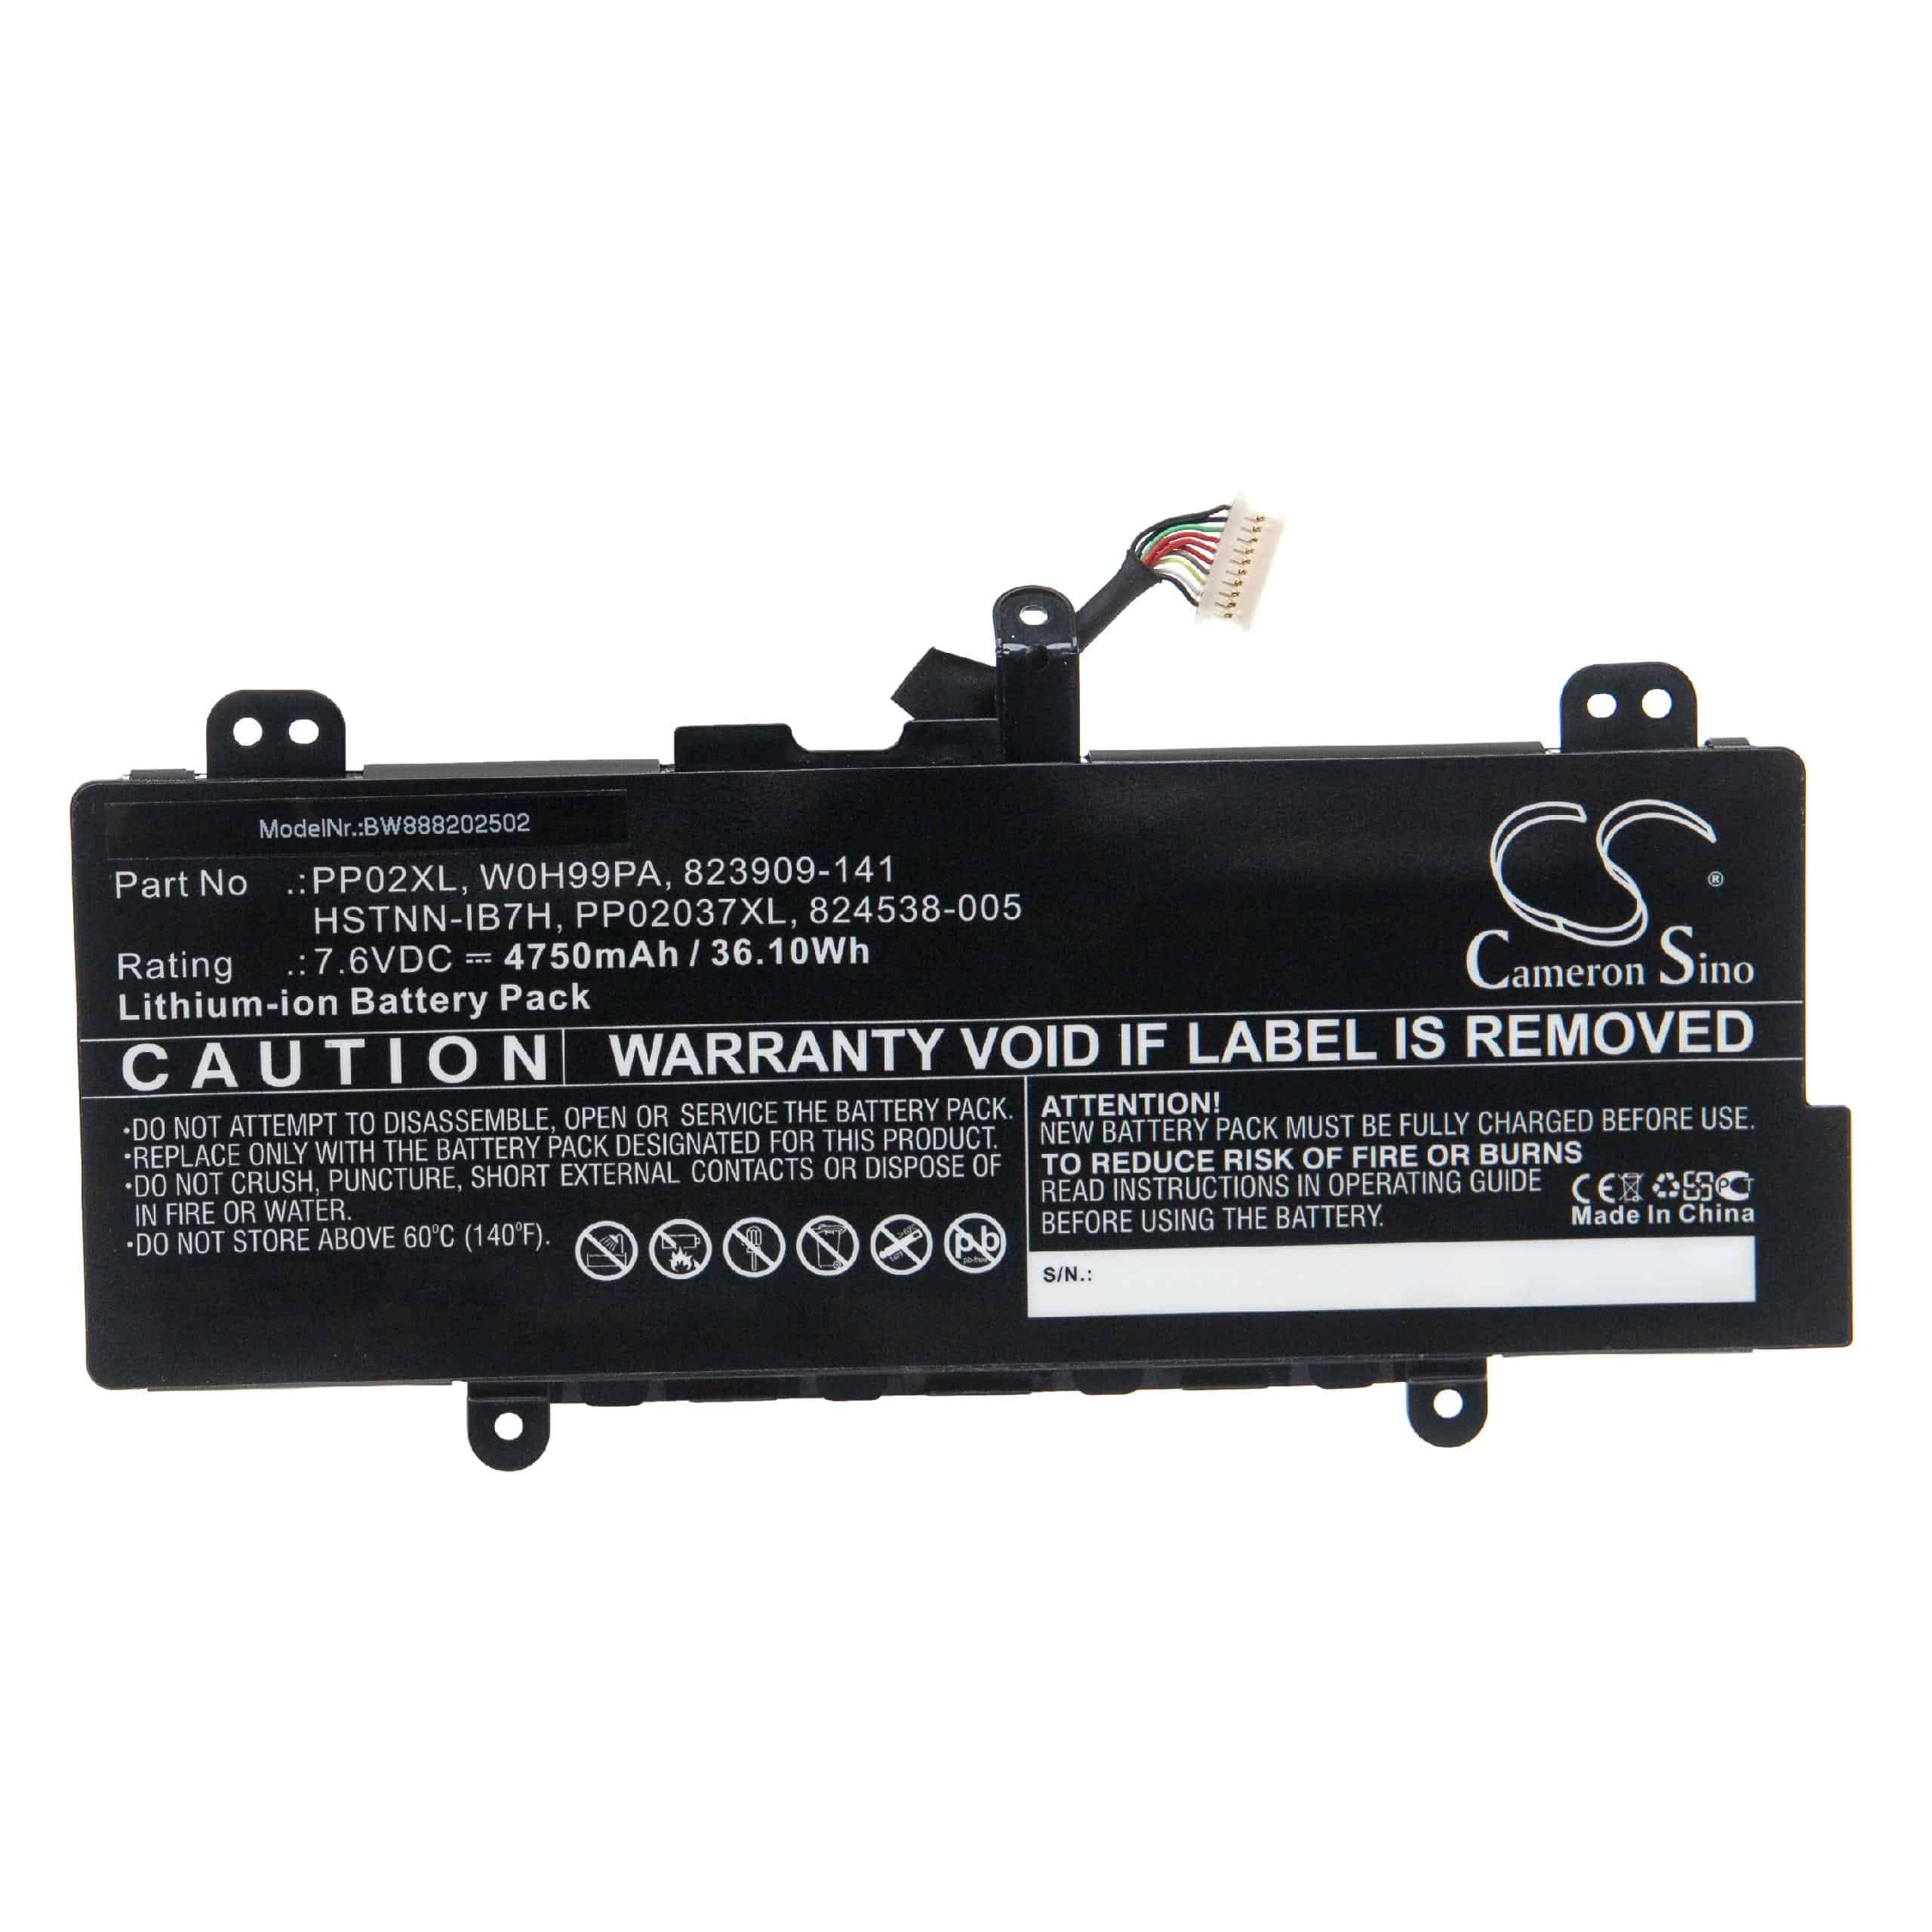 Notebook Battery Replacement for HP 823909-141, 824561-005, 824538-005, 824538-850 - 4750mAh 7.6V Li-Ion